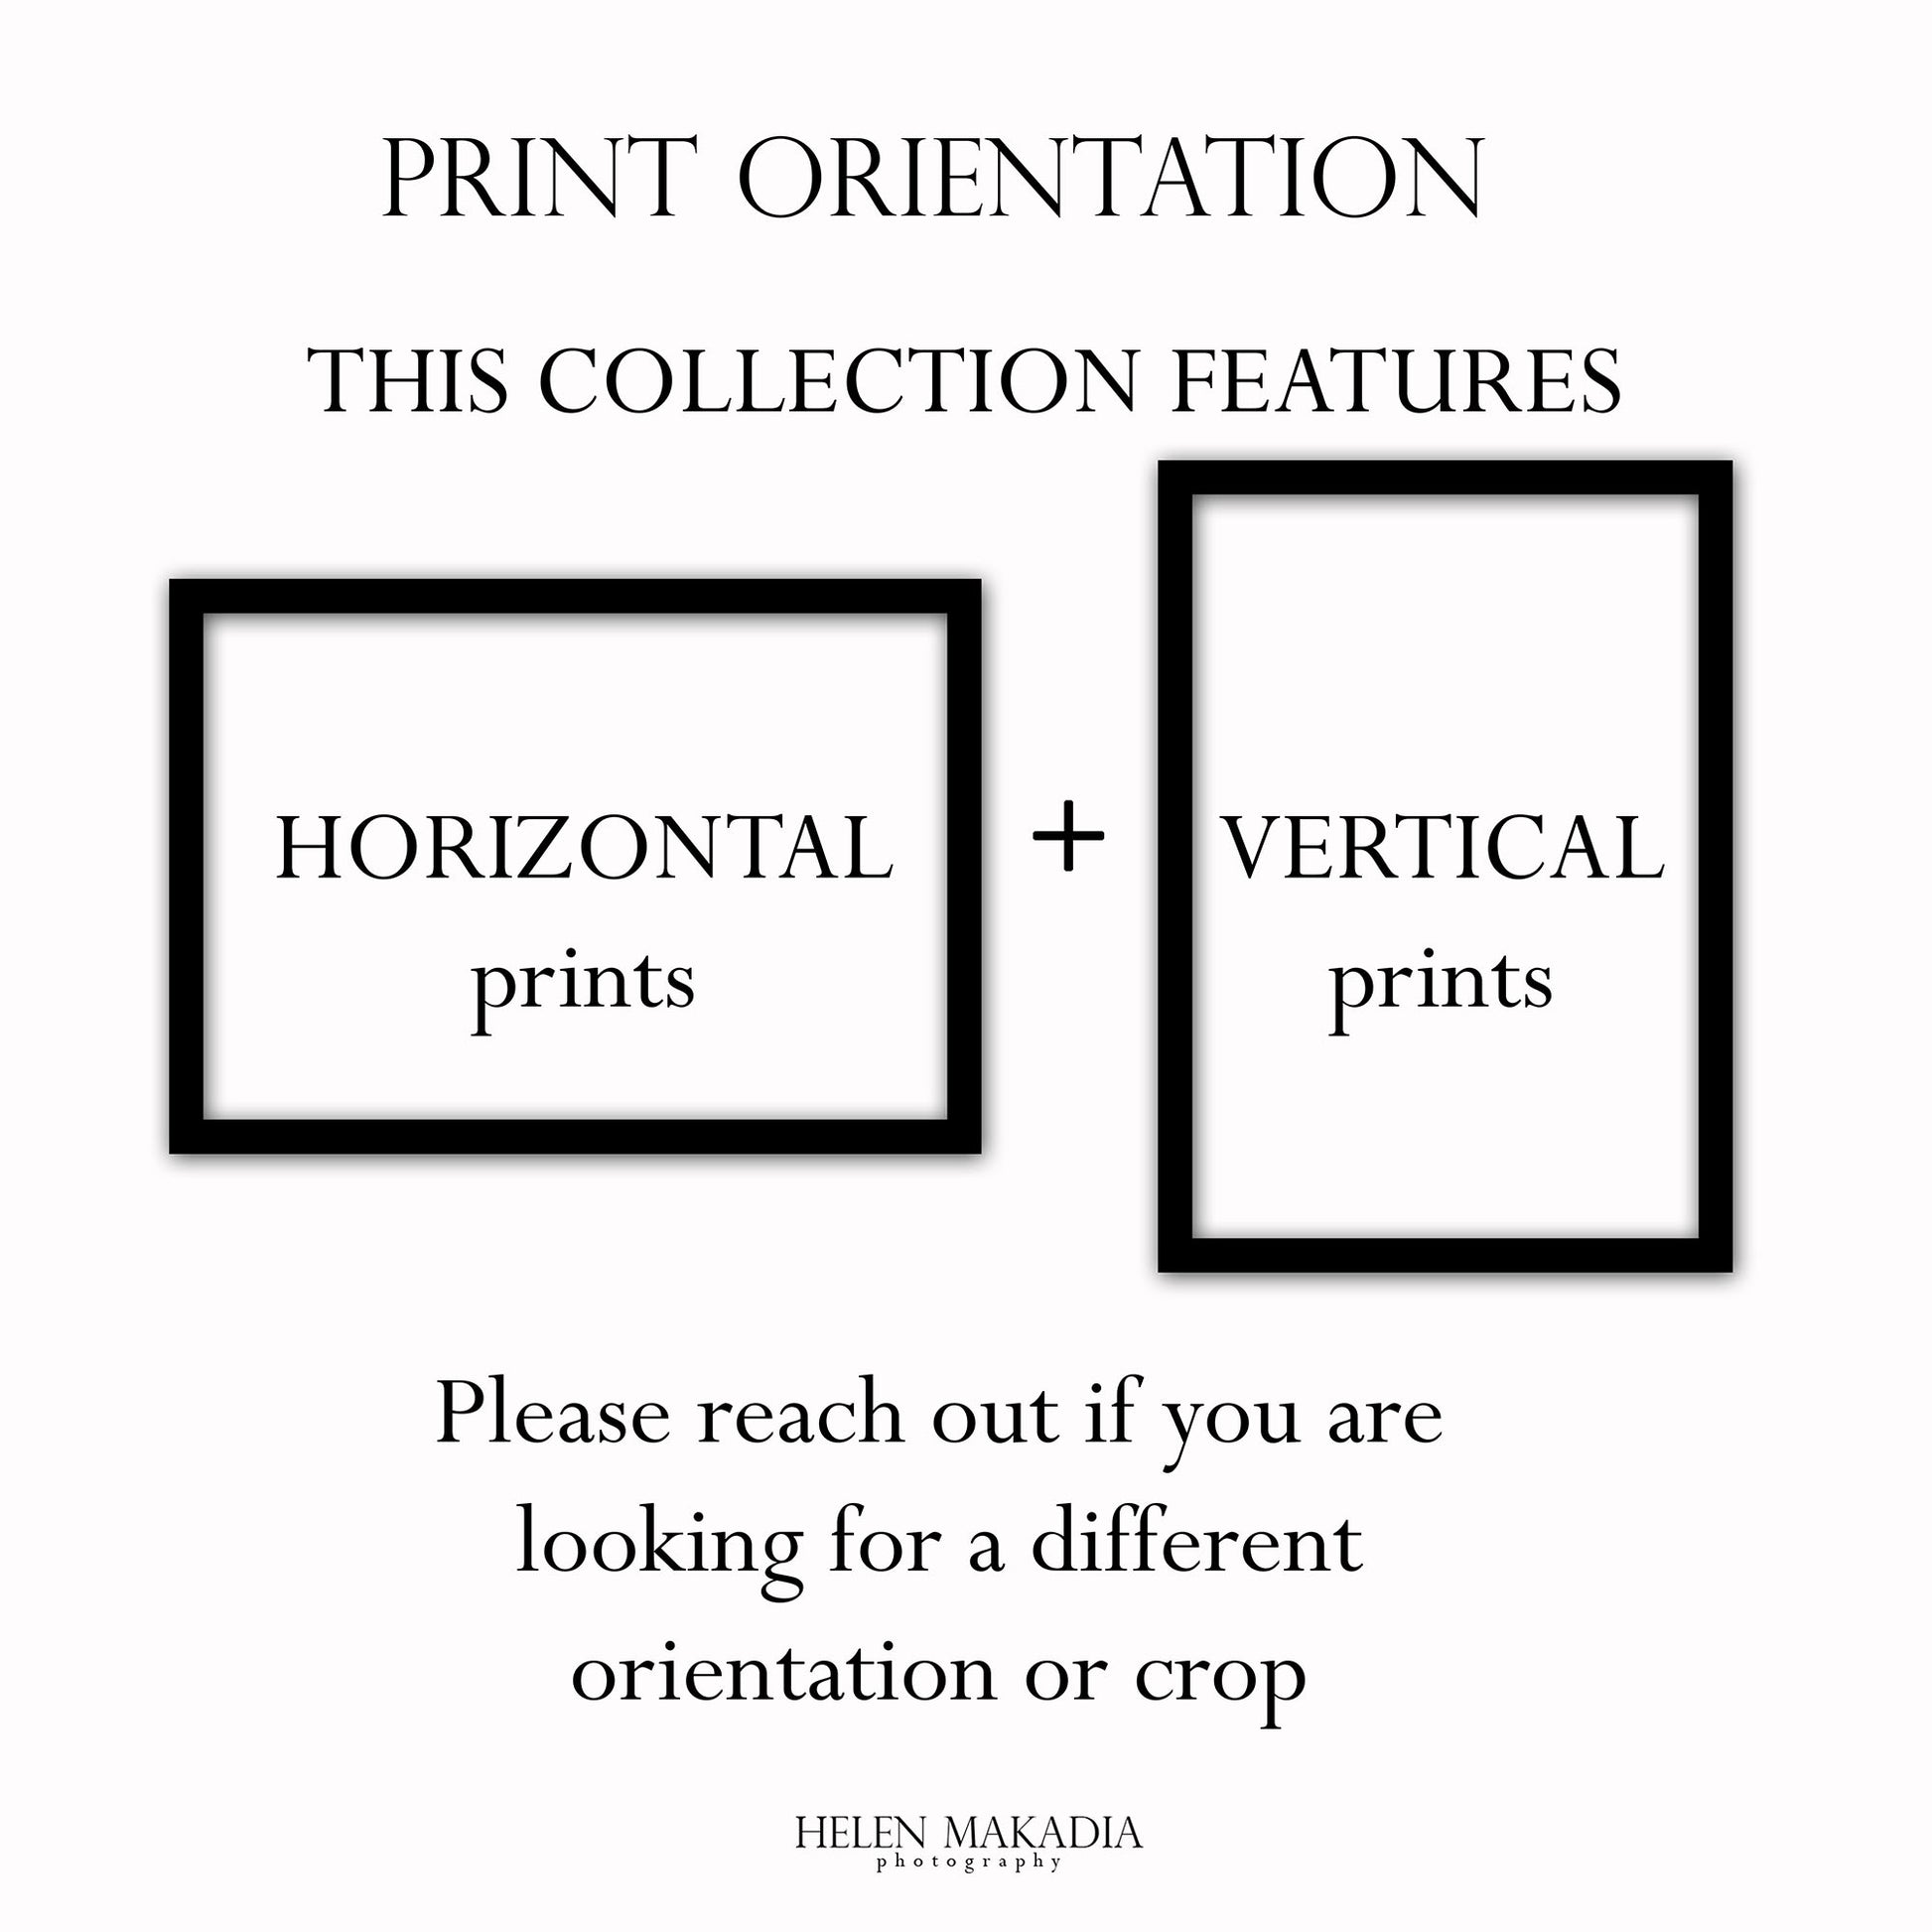 This set of images can have vertical and horizontal orientation